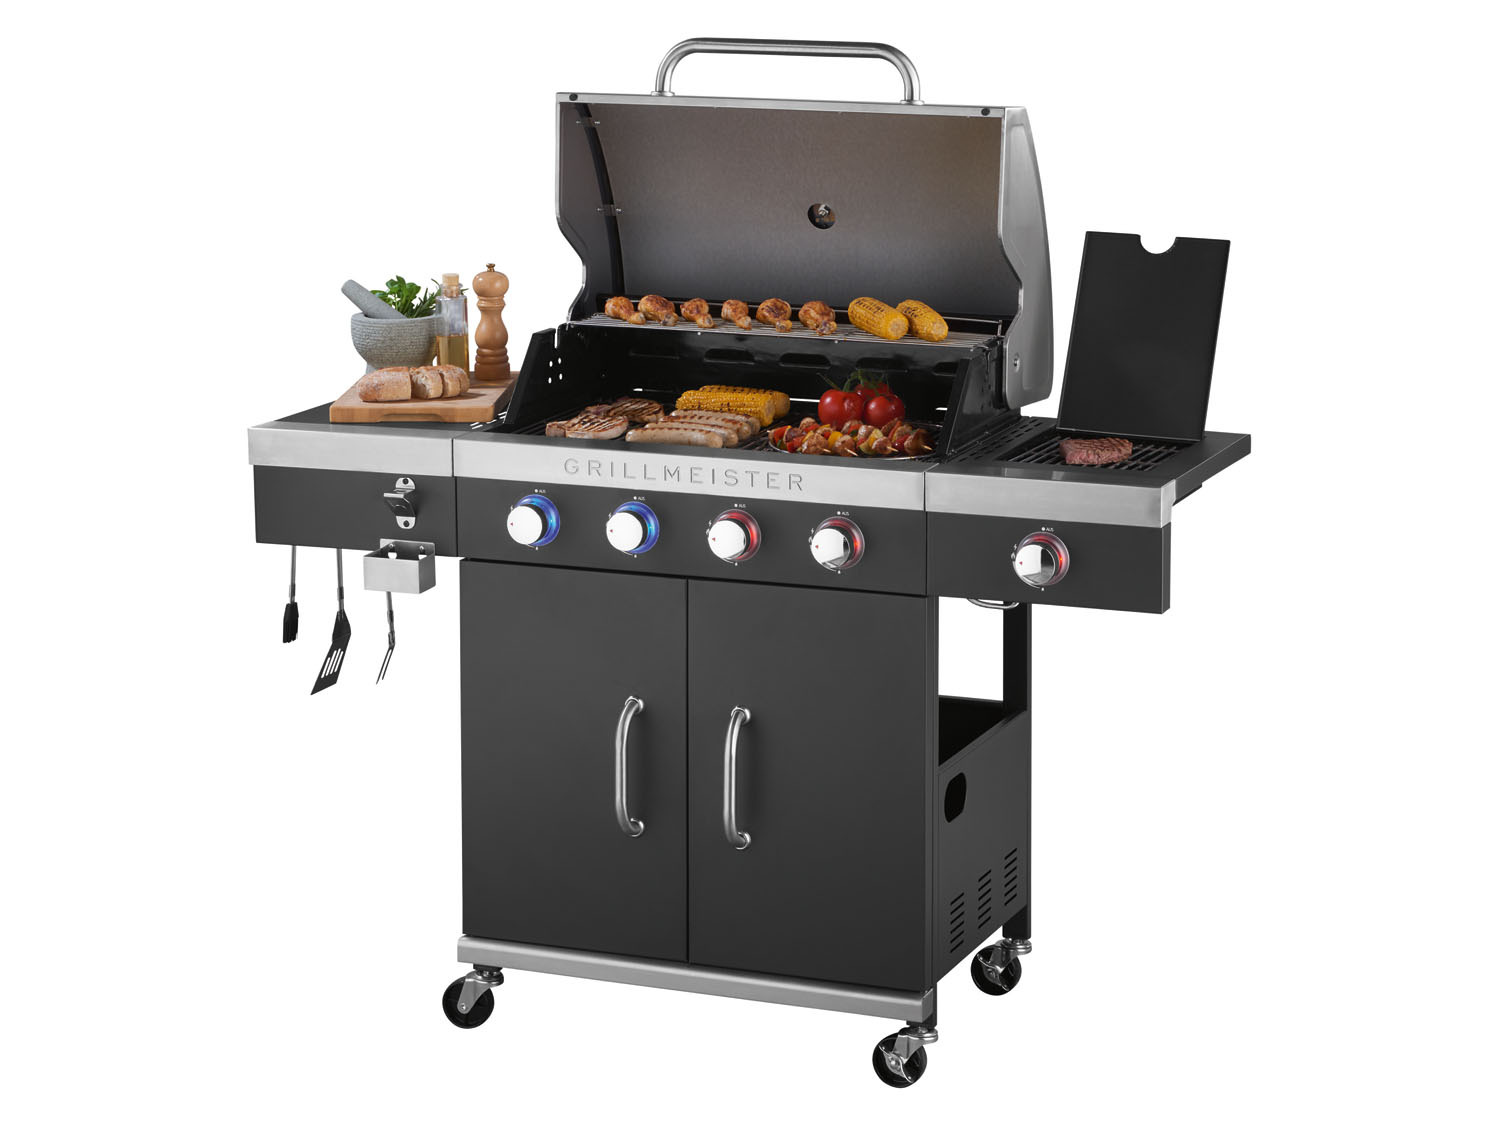 GRILLMEISTER Gasgrill, 4plus1 Brenner, 19,7 kW | LIDL